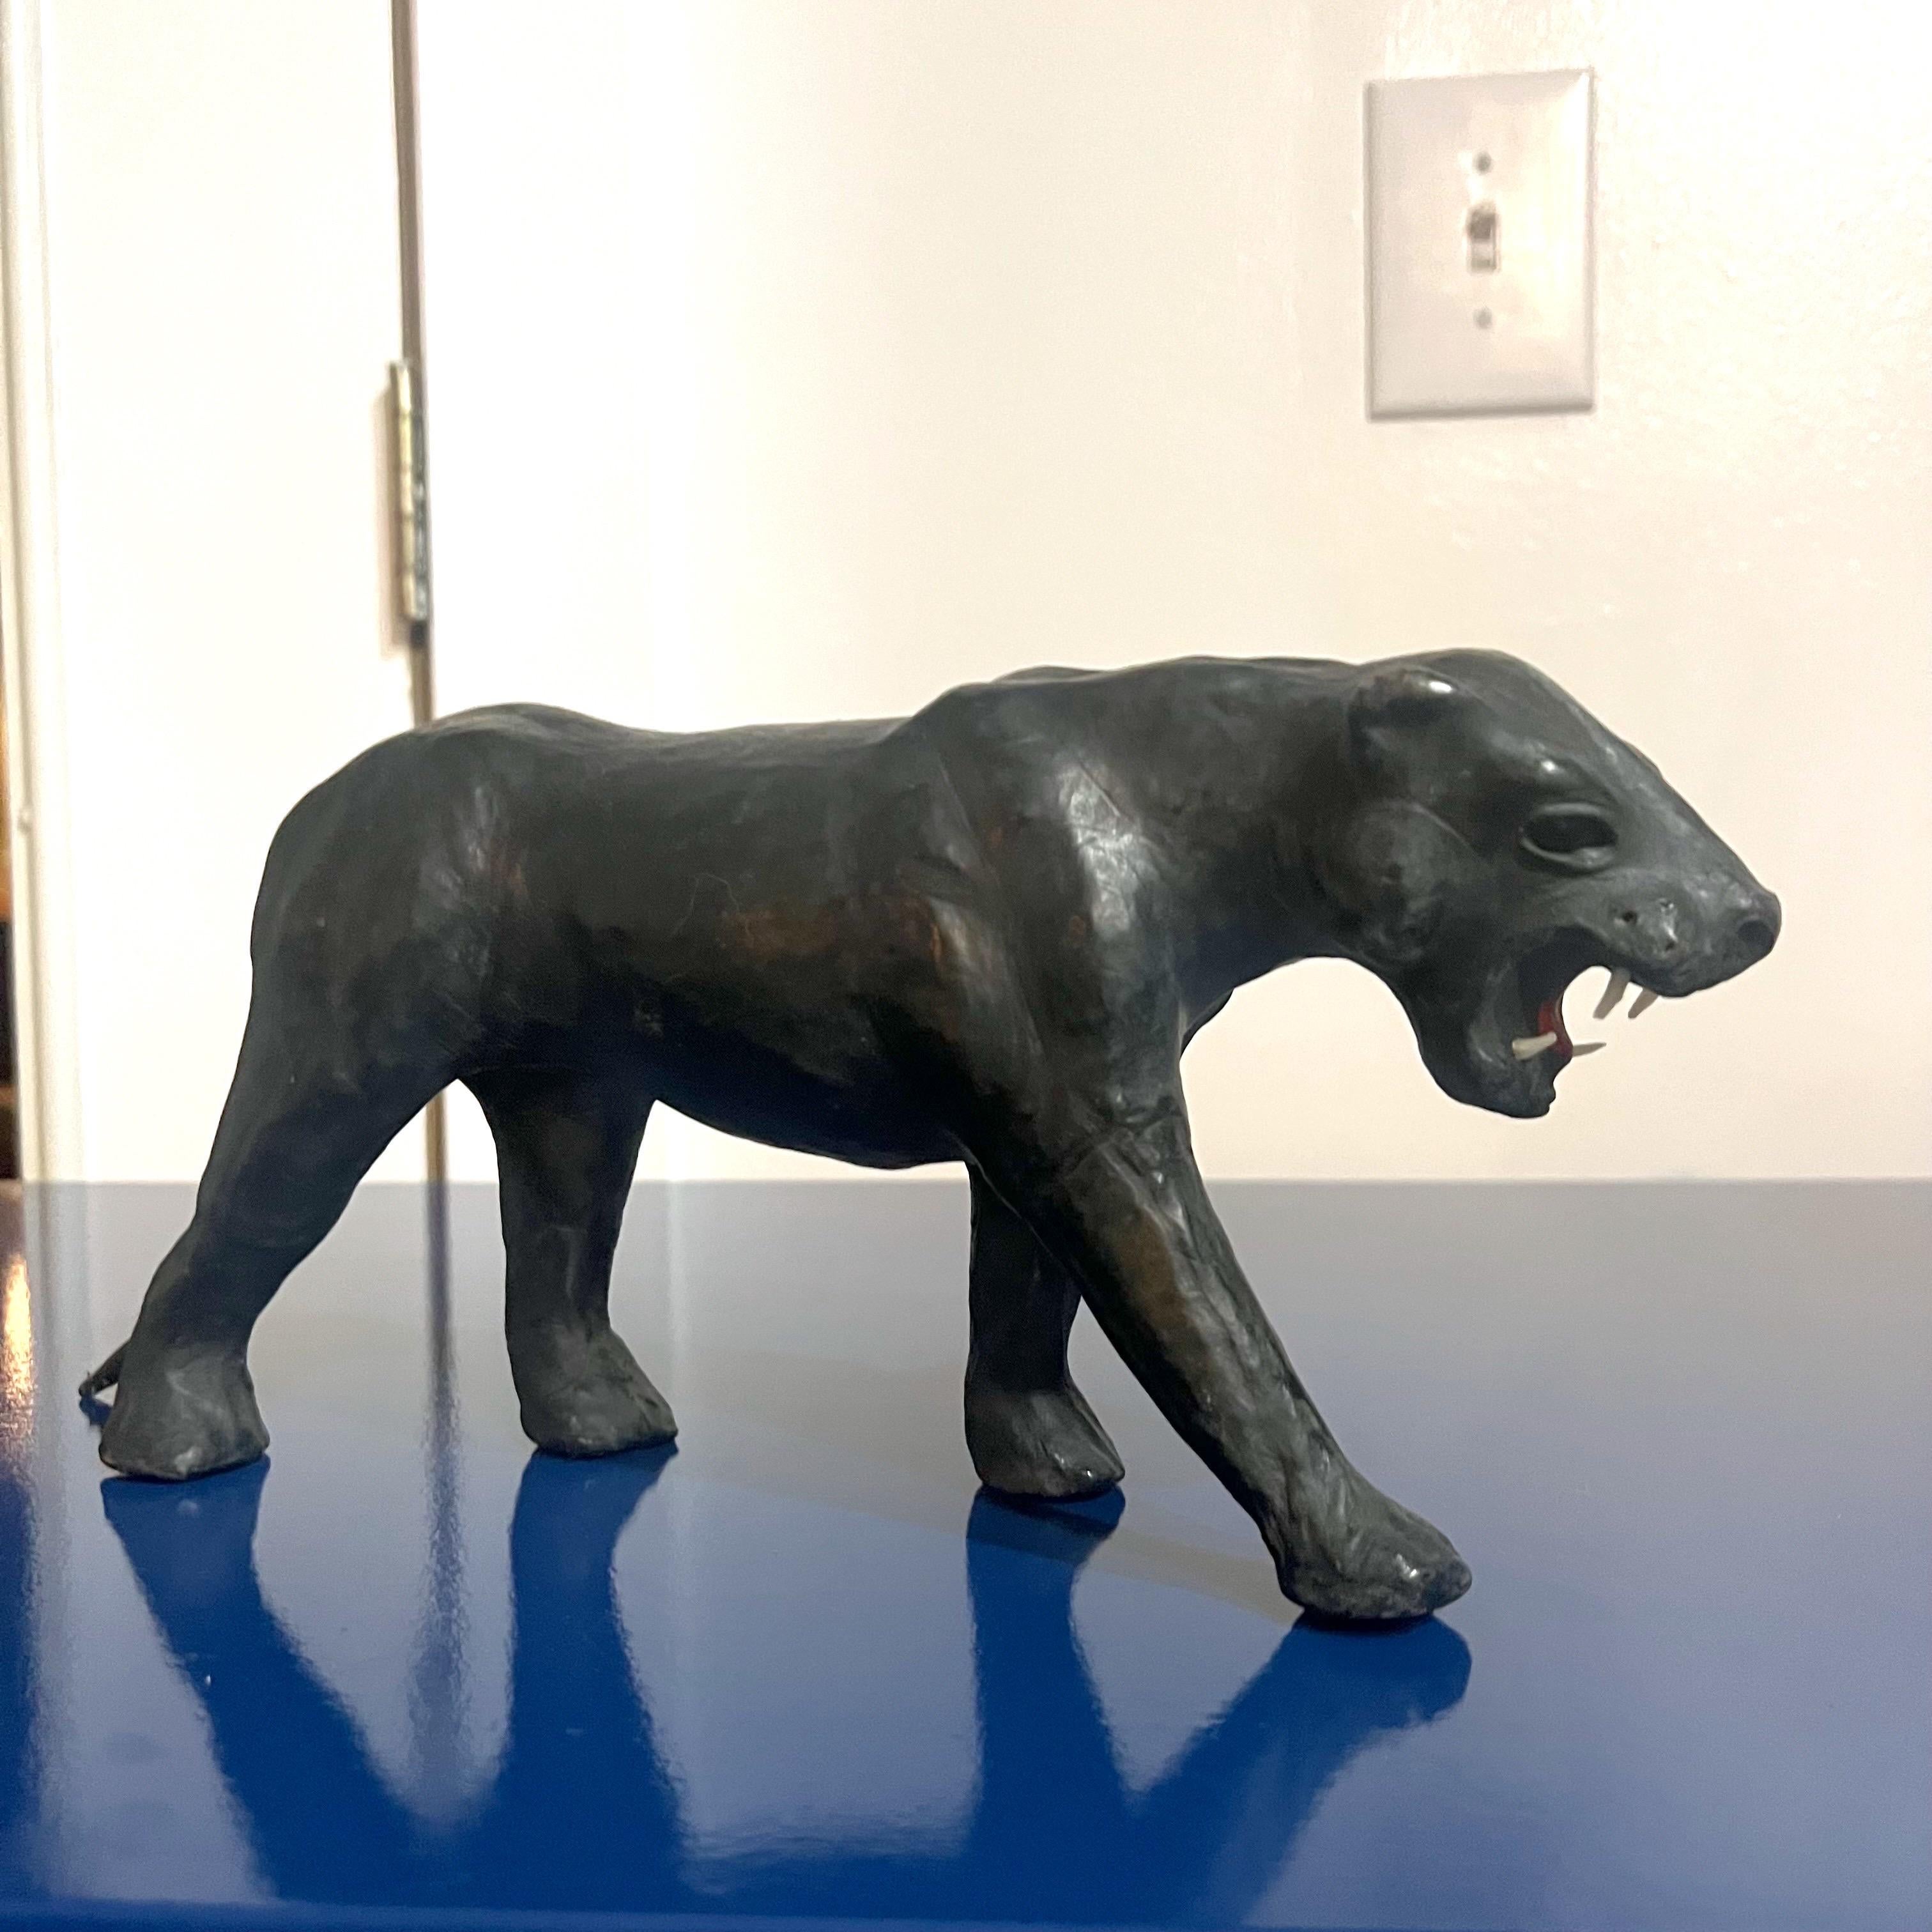 For your consideration we have 2 mid-20th century era “big cat” leather wrapped animals. One being a panther who seems to be slowly approaching his prey. And the second is a cheetah who appears to be running towards his or her prey. Both are